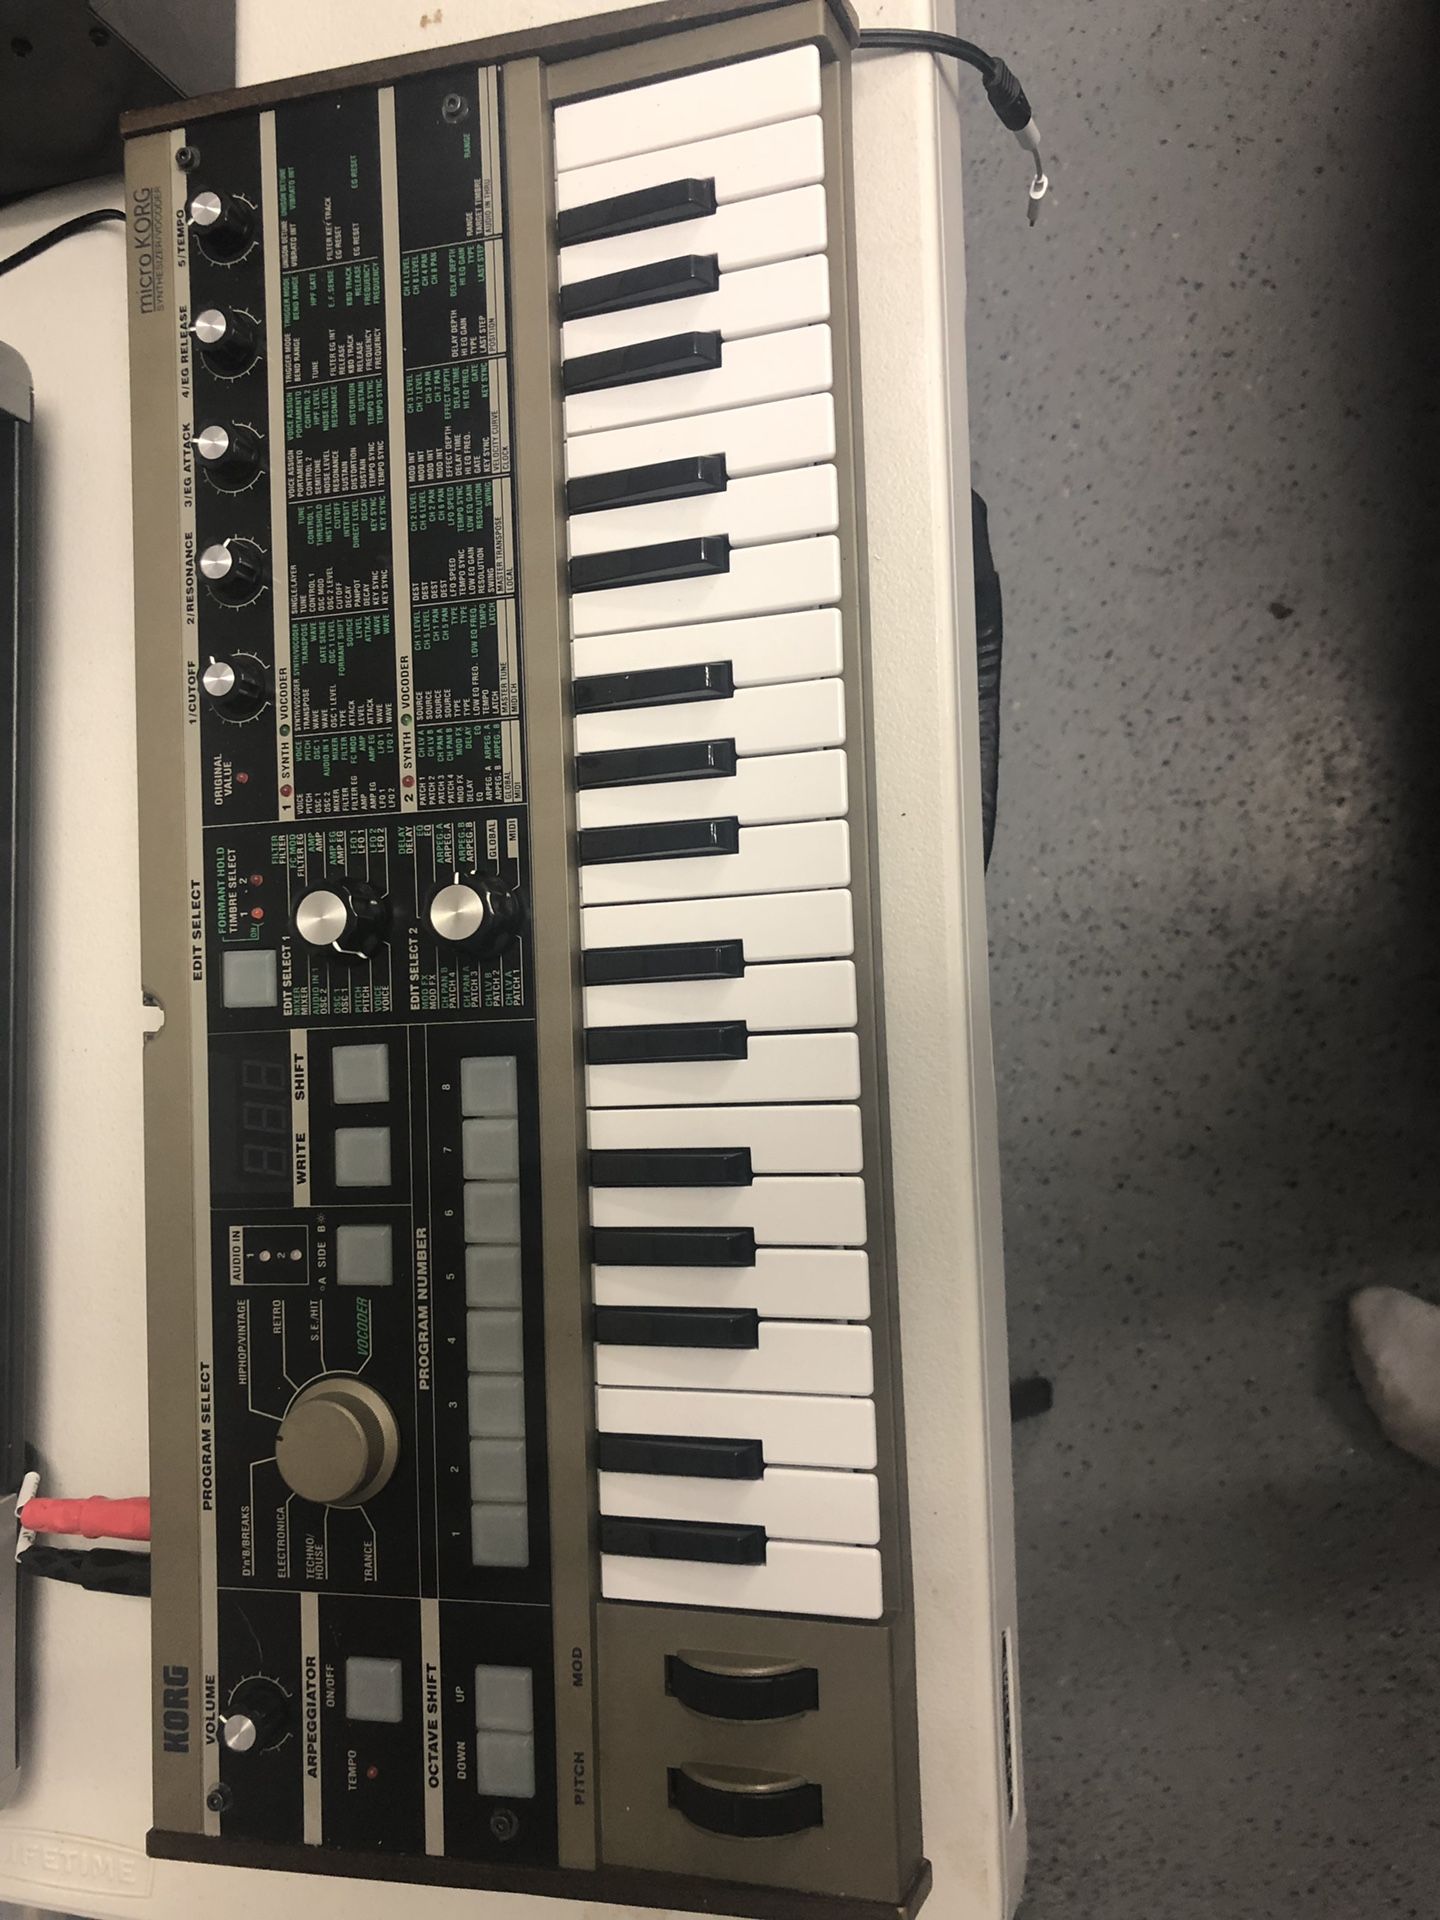 KORG Microkorg with vocoder, mic and cable included